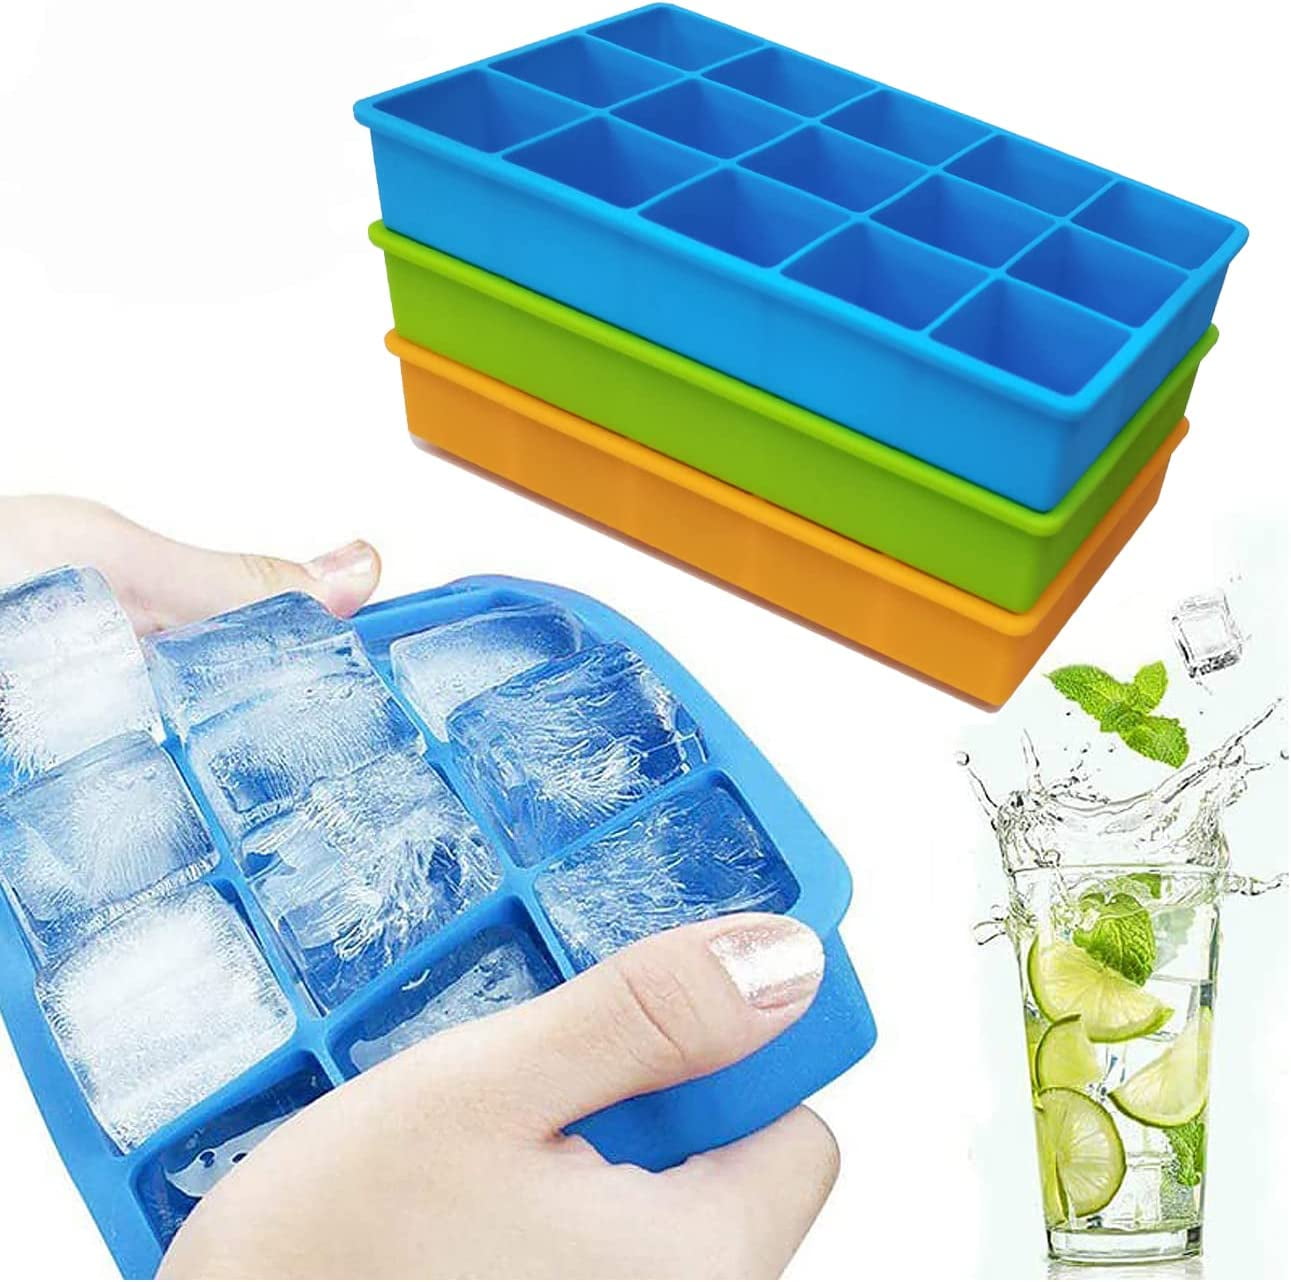 3 Pack Ice Cube Trays, 100% Food Grade Silicone Ice Cube Molds with  Removable Lids, 15 Grids Ice Cube Trays for Freezer, Reusable and BPA Free  for